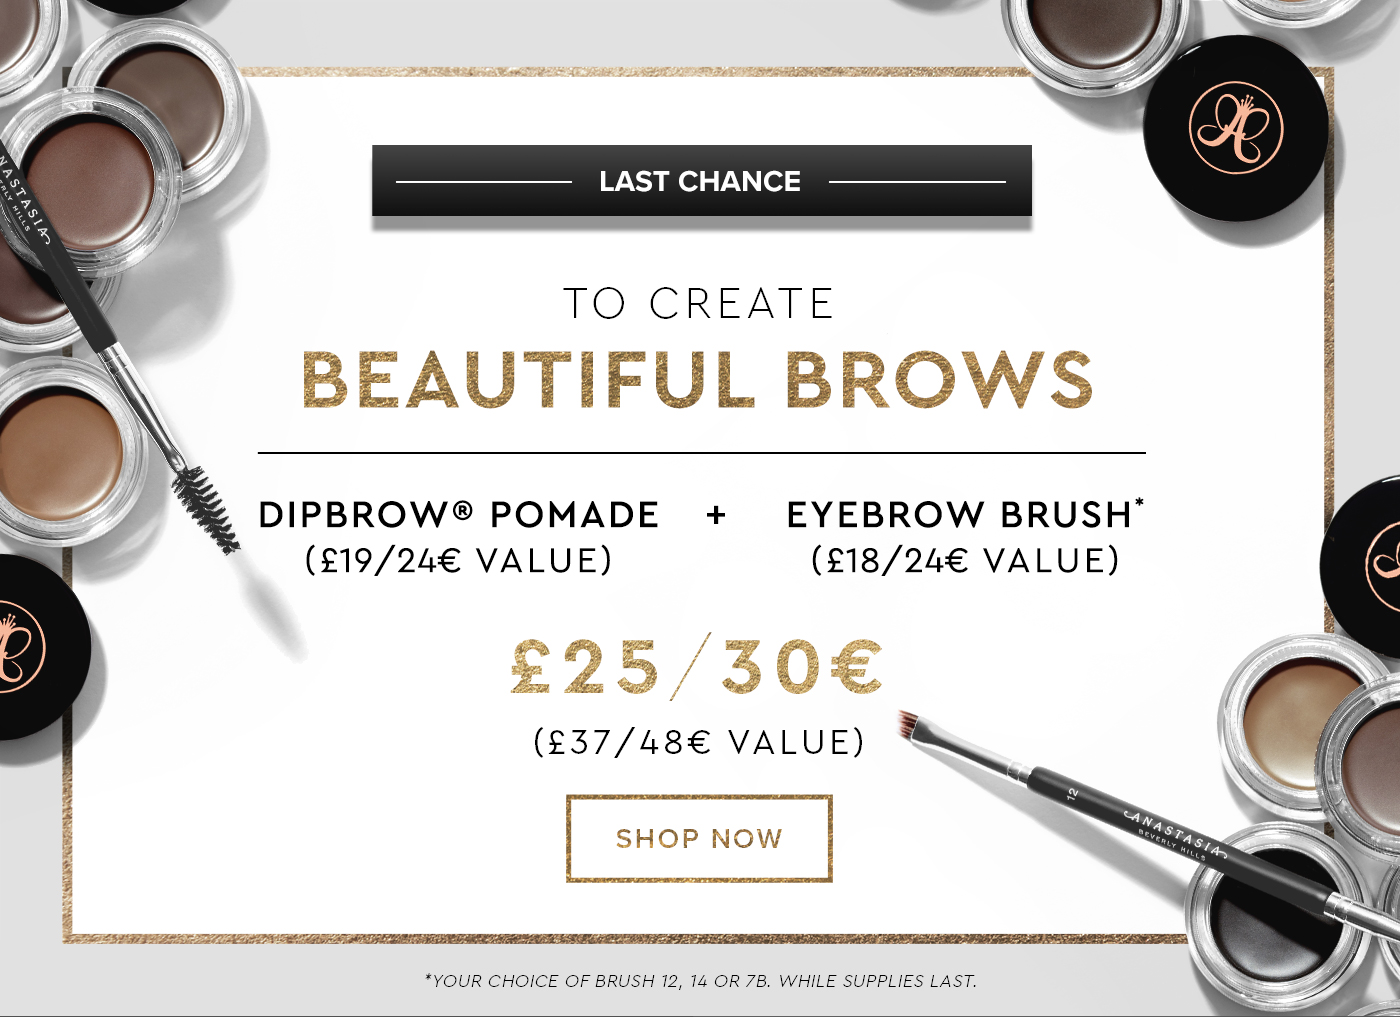 Last Chance to Create Beautiful Brows